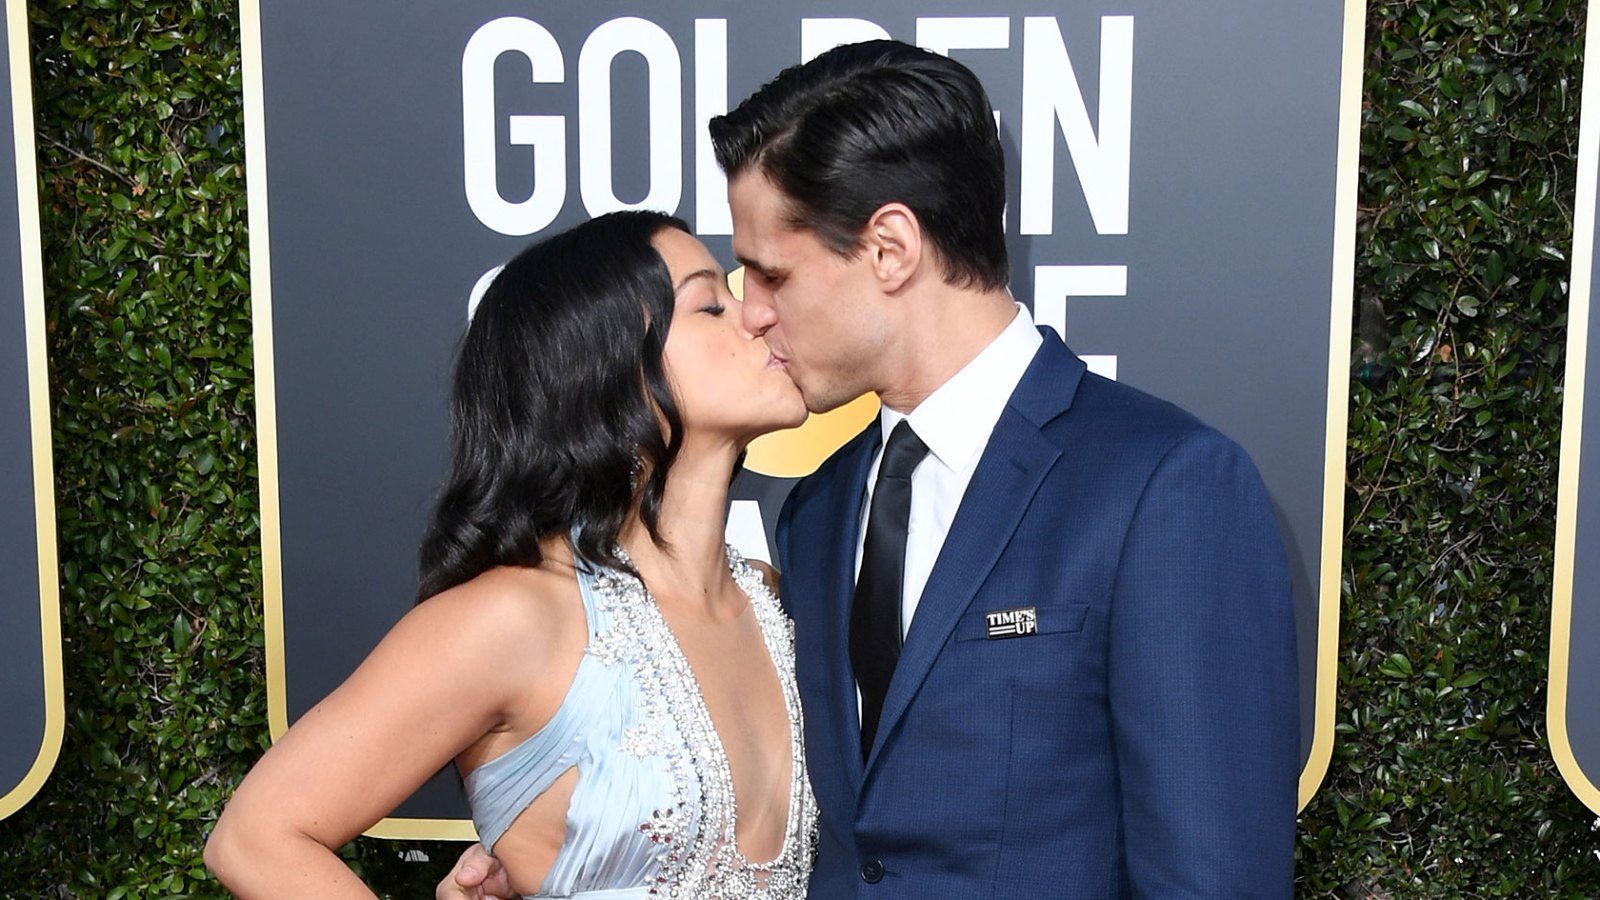 Gina Rodriguez Almost Married Fiance Joe LoCicero After the 2019 Golden Globes